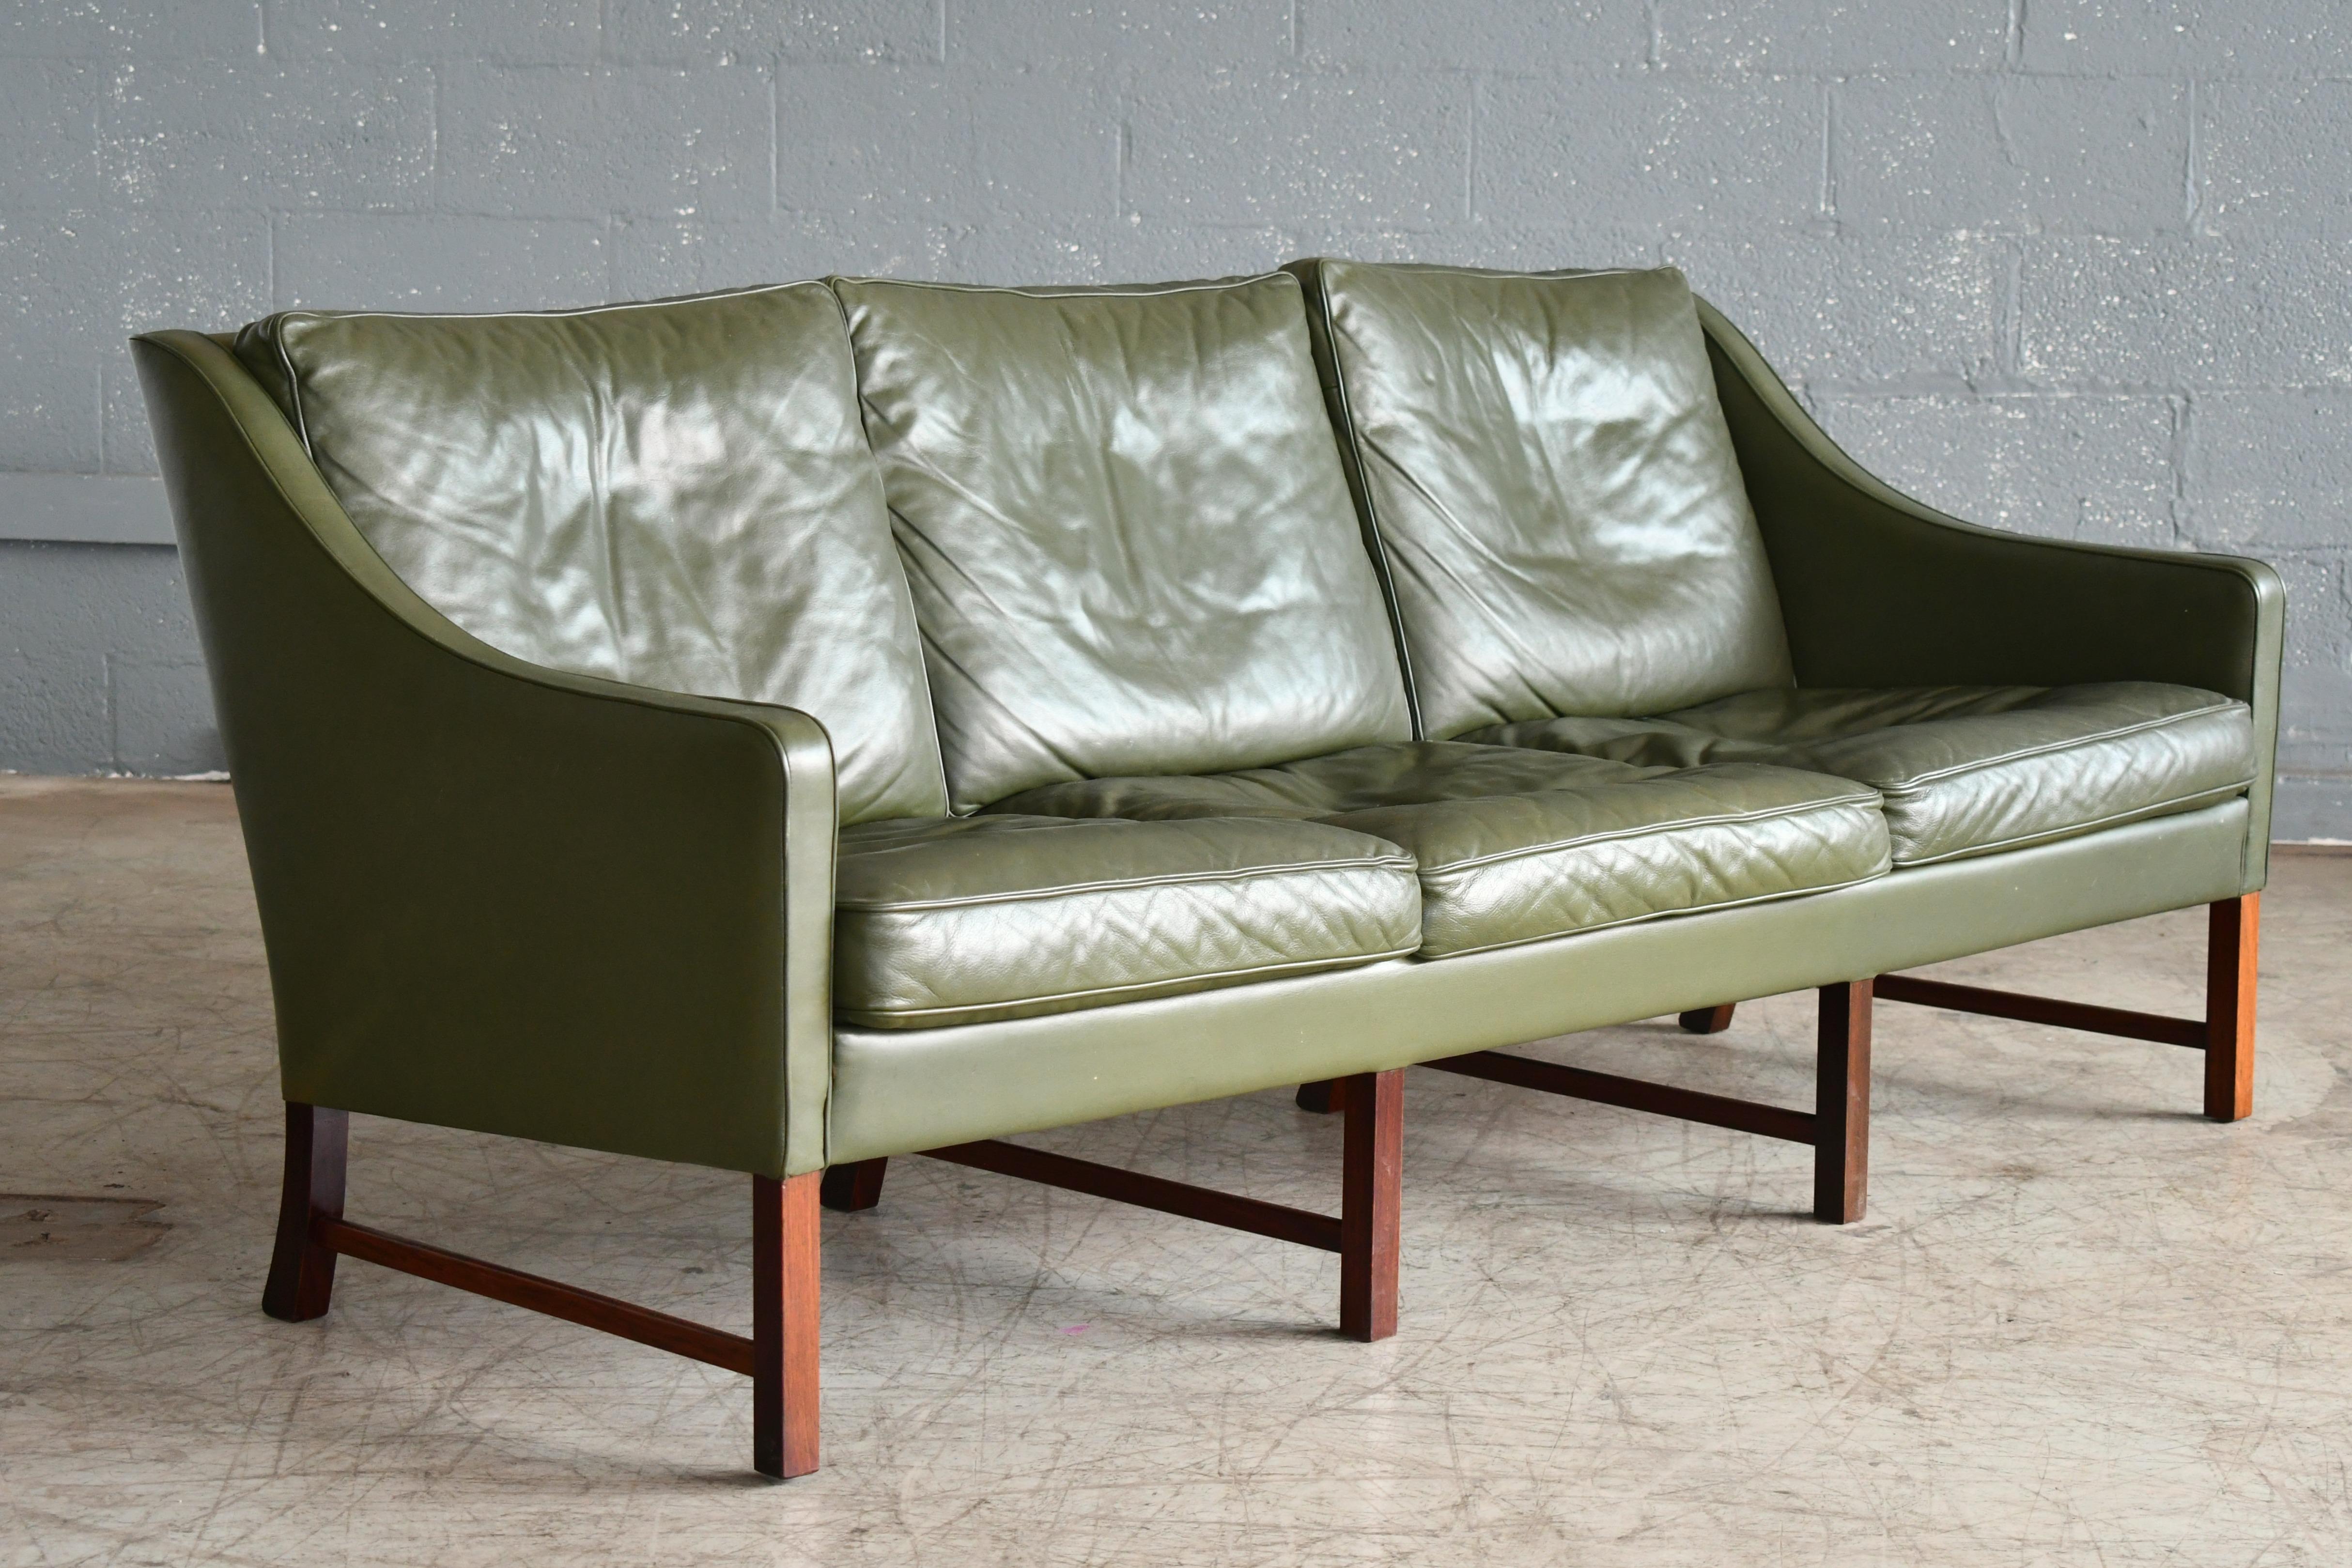 This very elegant and generously sized three-seat sofa is unmarked but in terms of design bears many of the hallmarks of one of Norway's most iconic designers, Fredrik A. Kayser. This sofa resembles Kayser's model 965 made by Vatne but with a